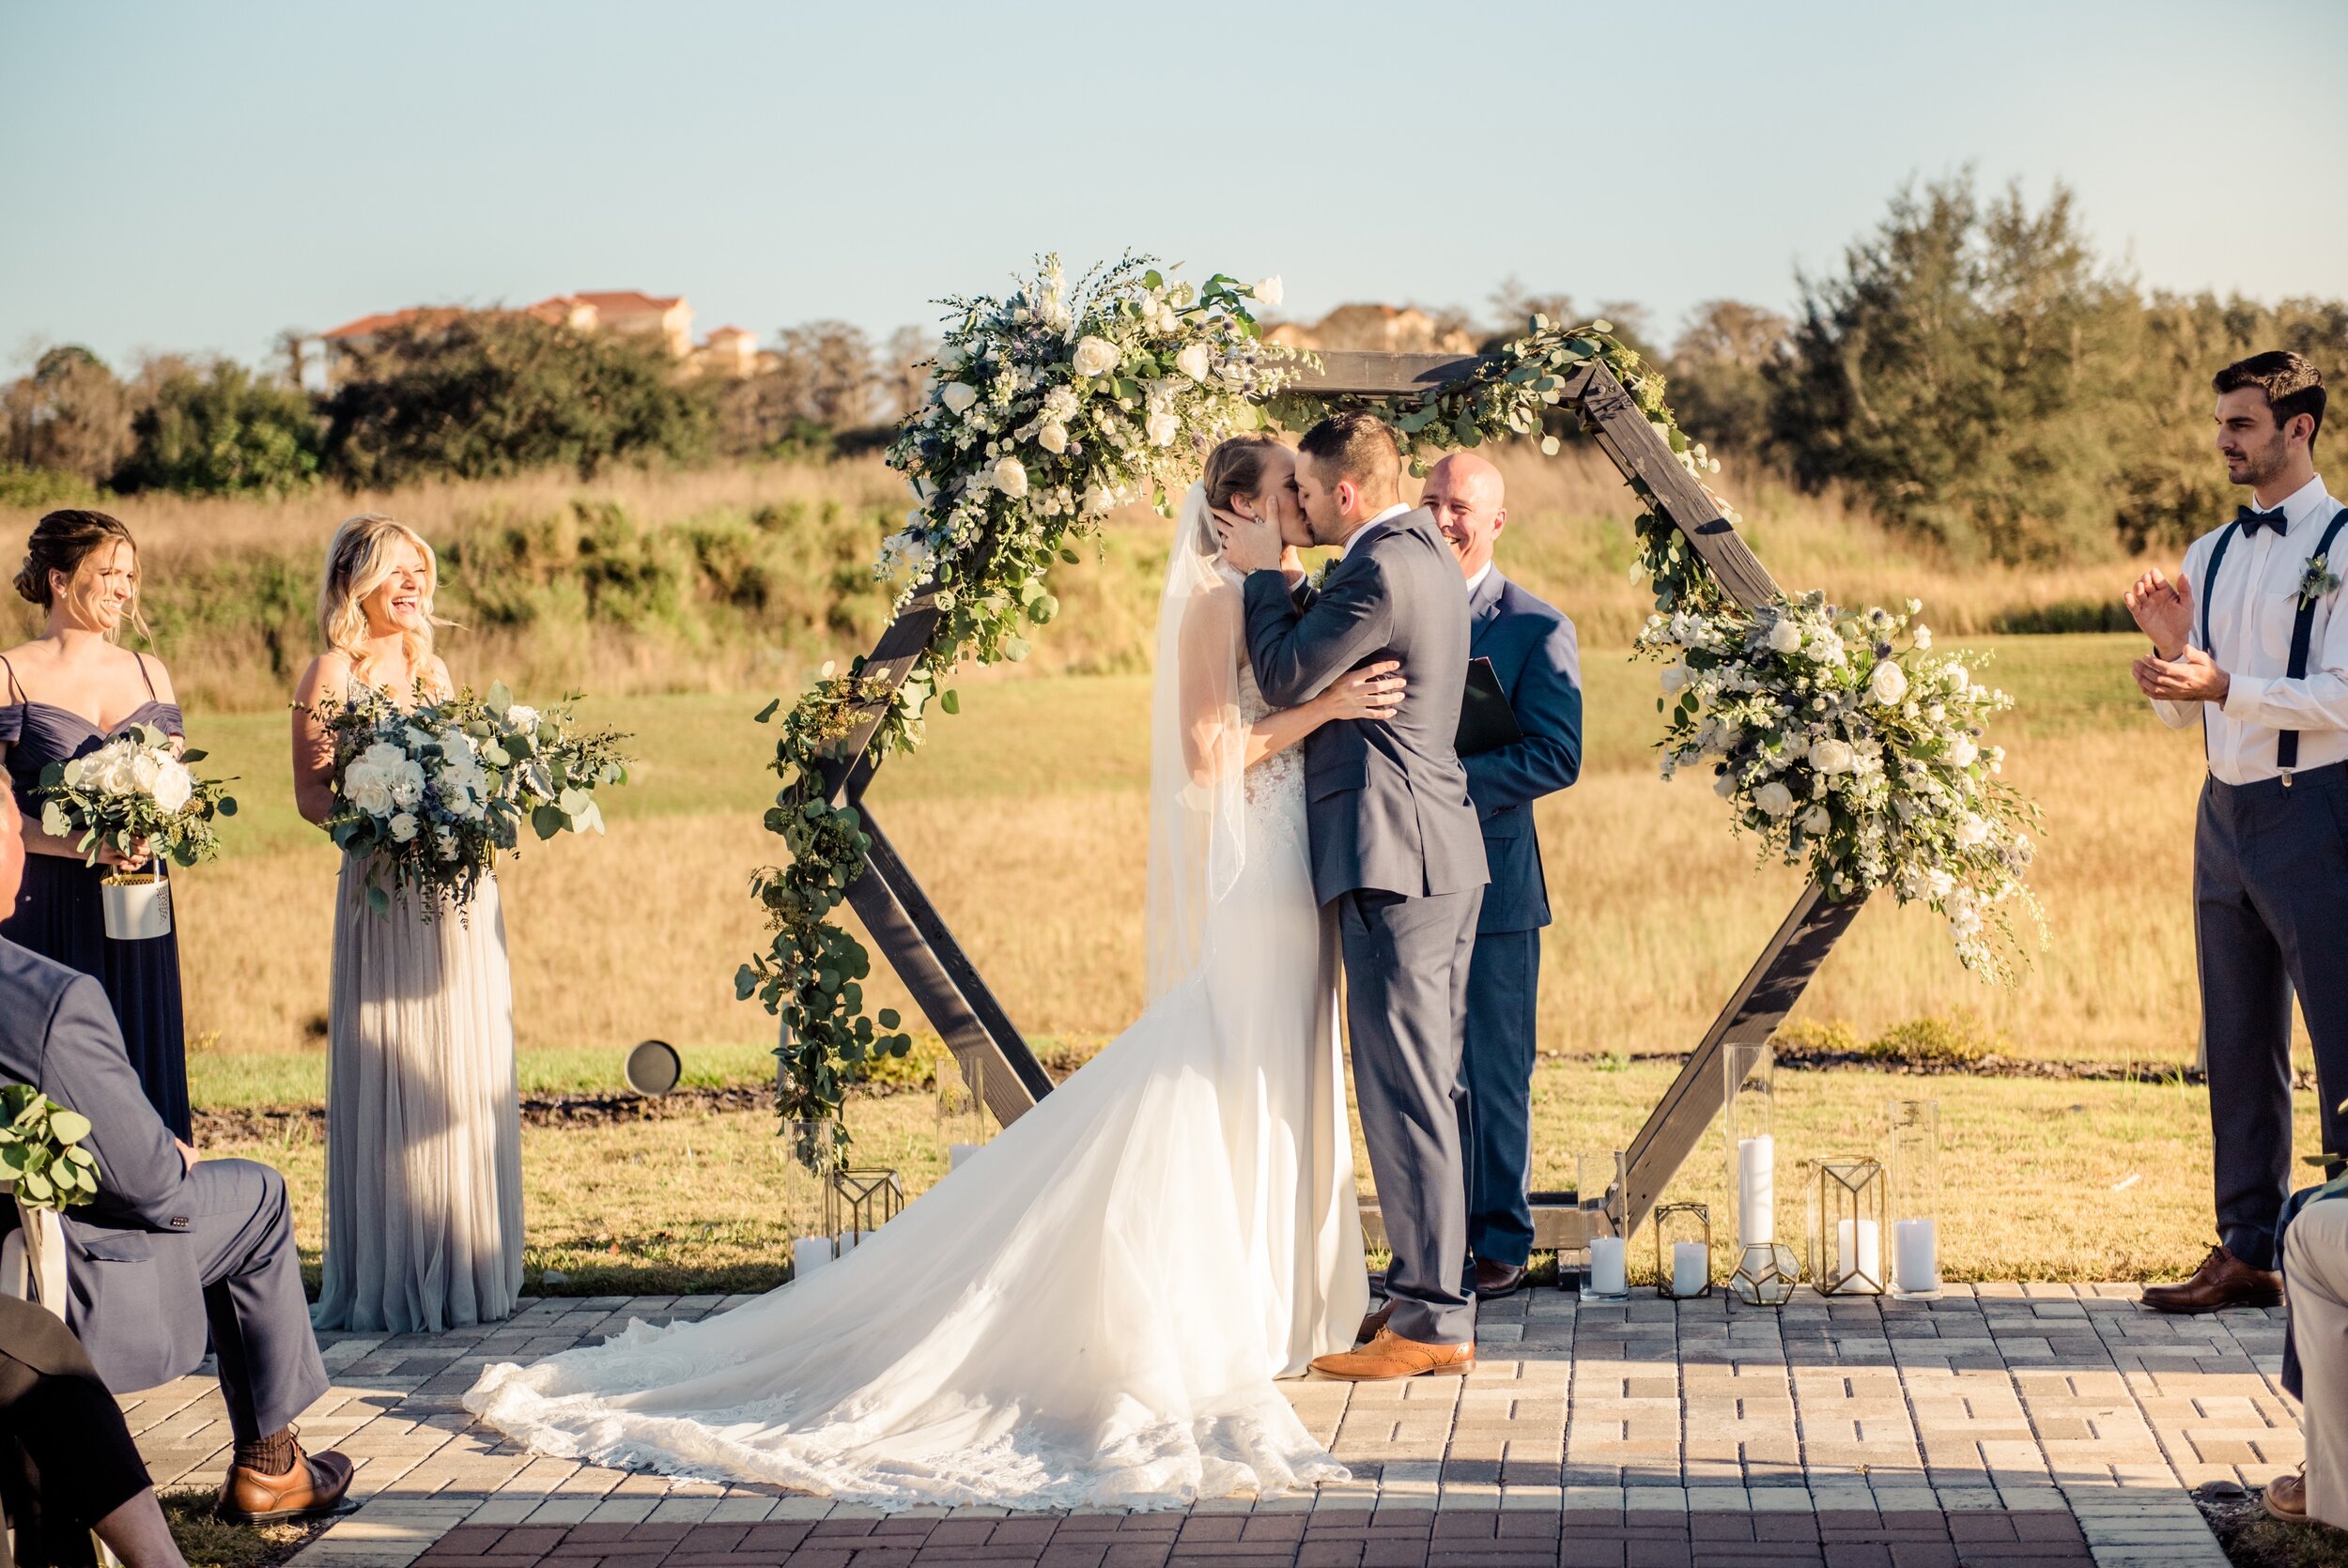 The bride and groom in front of the hexagon wooden arch at Formosa with white and green floral and geometric vases. Sealed with a kiss!!